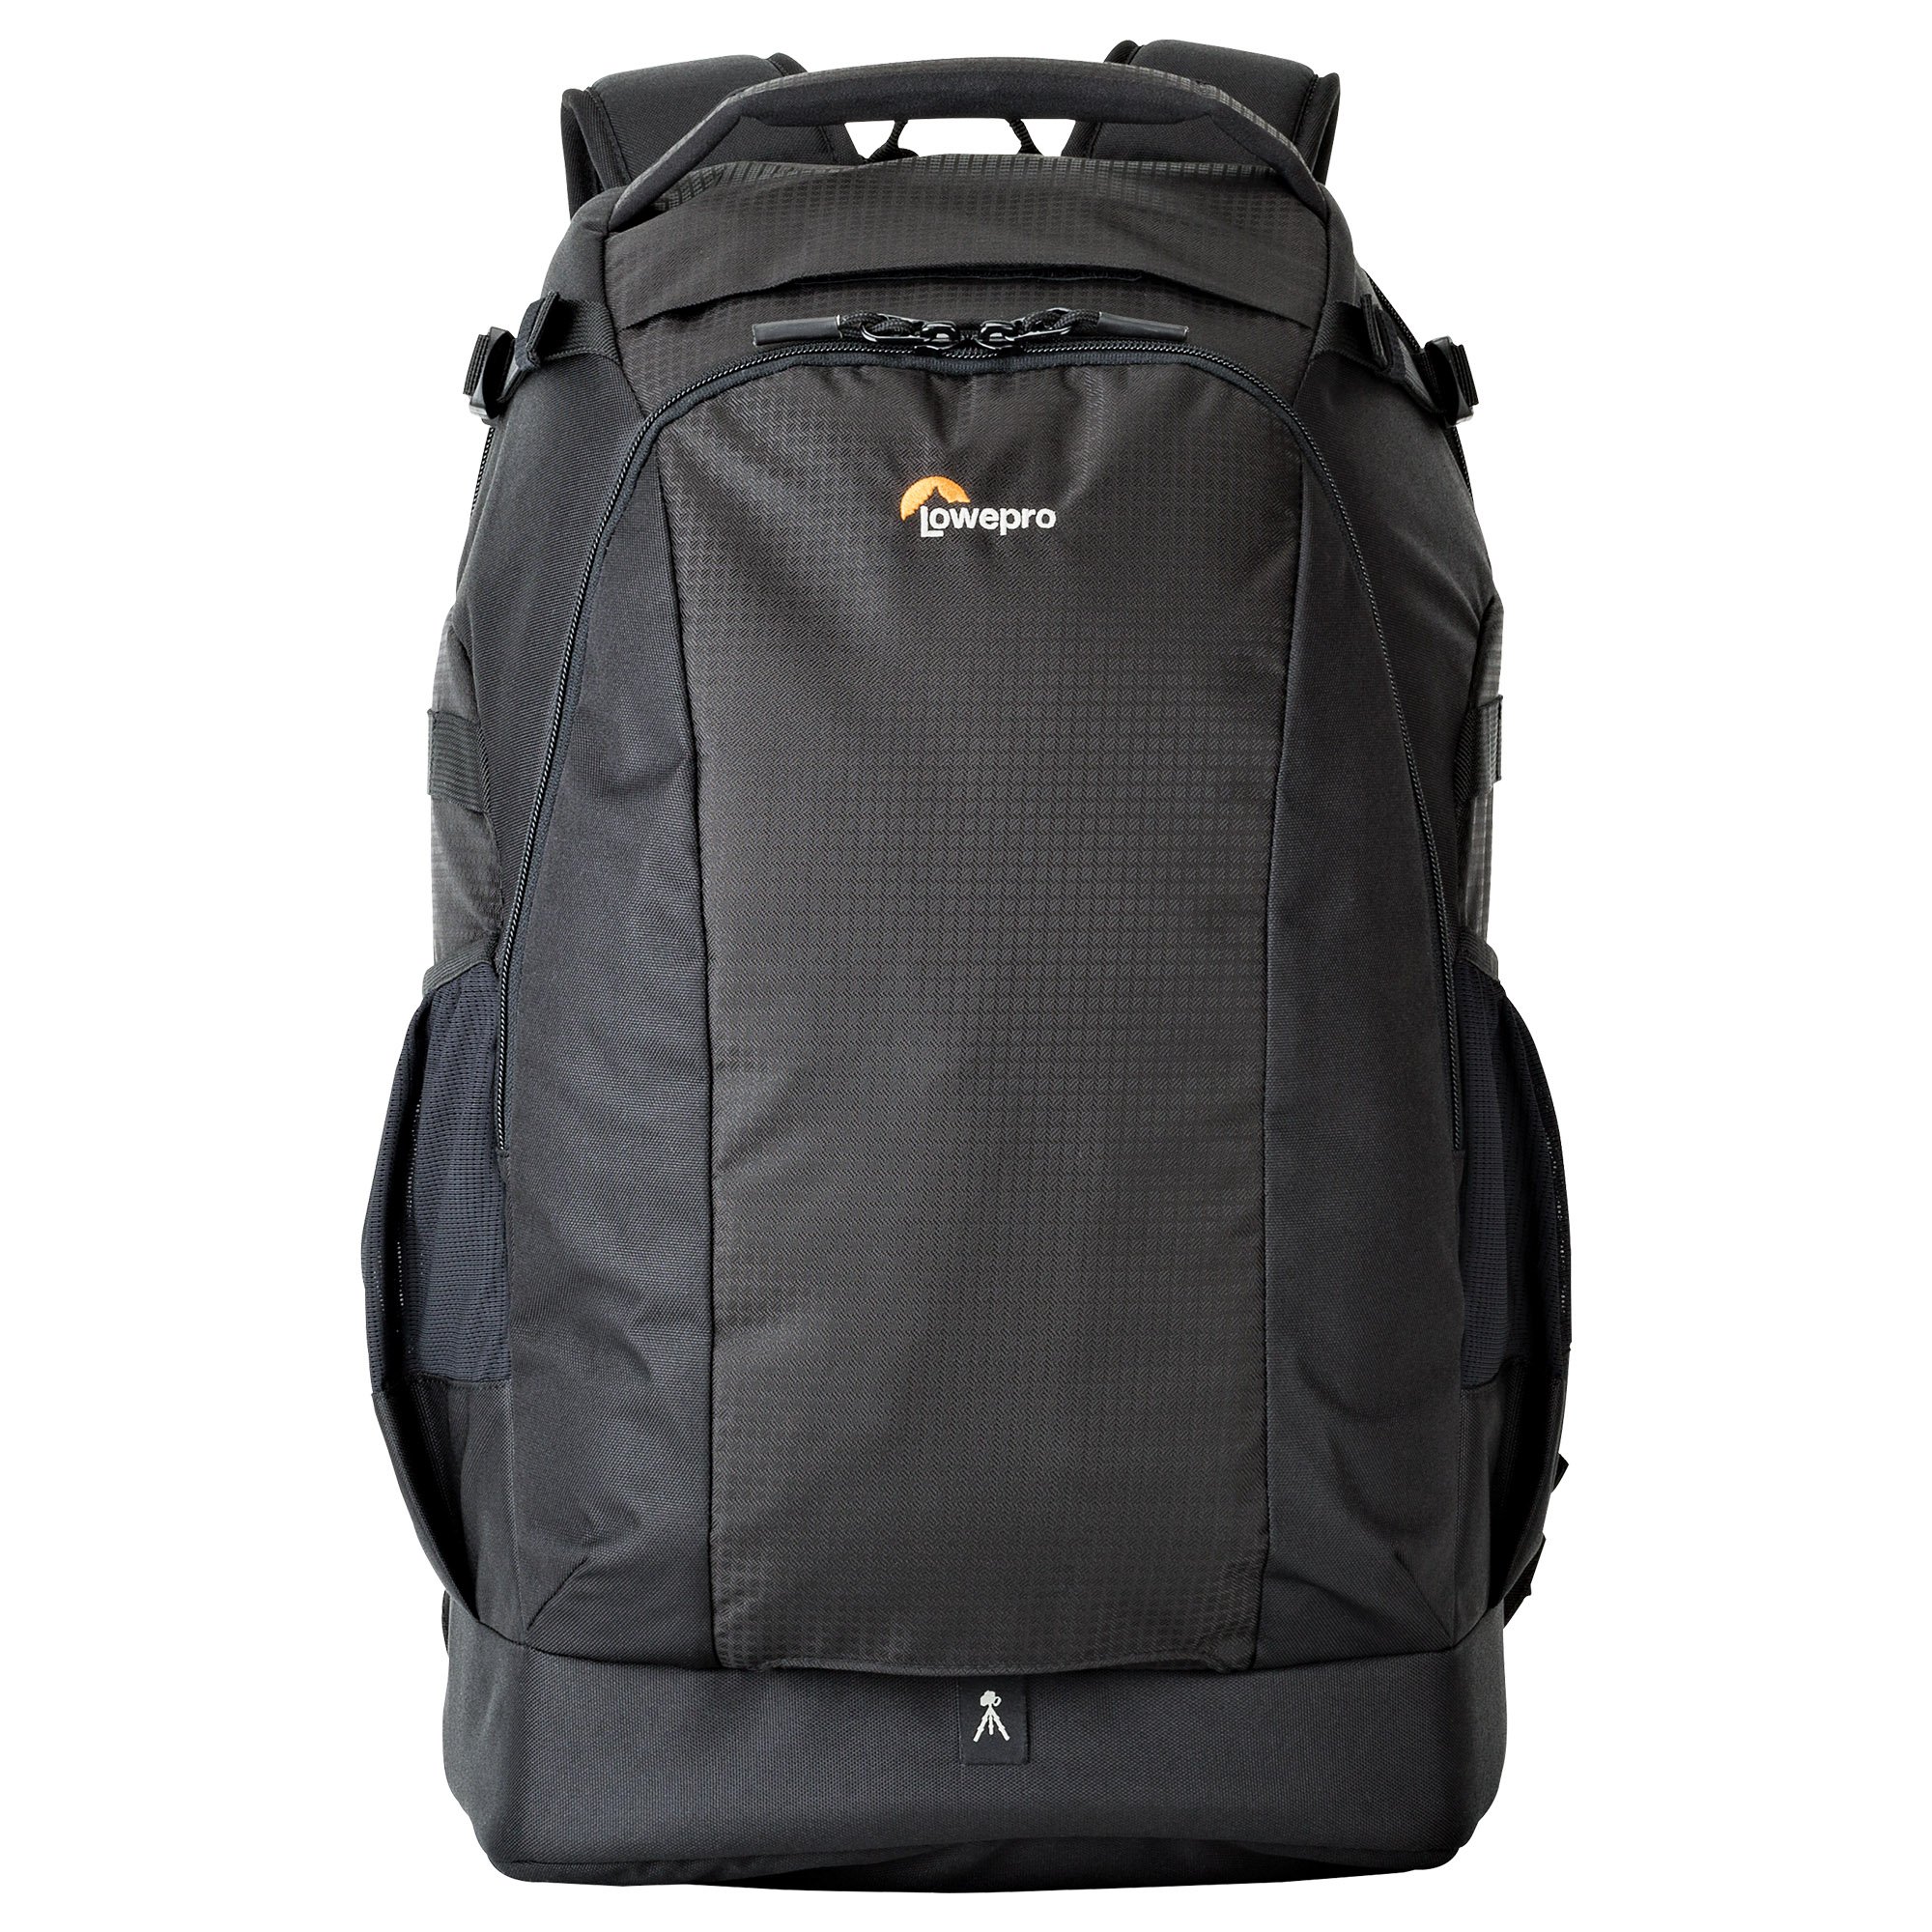 Lowepro LP37131, Flipside 500 AW II Camera Backpack, Fits Mirrorless, Compact Drone, DSLR with Lens, Extra Lenses, Black